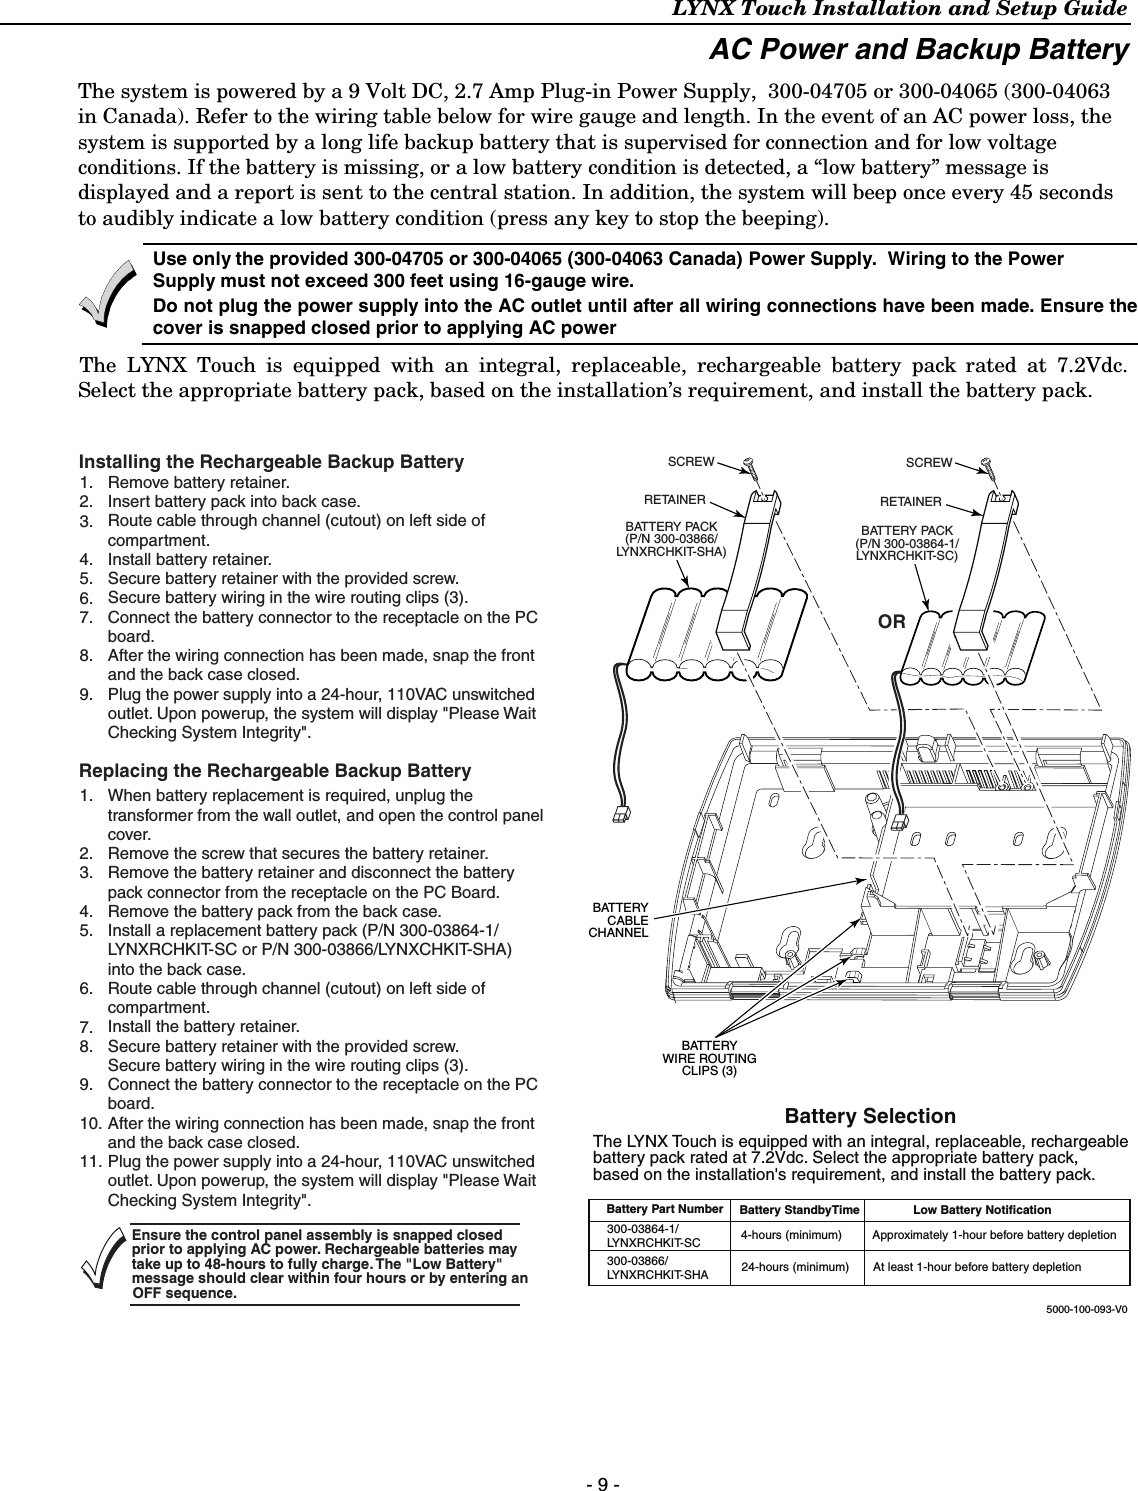 LYNX Touch Installation and Setup Guide - 9 - AC Power and Backup Battery The system is powered by a 9 Volt DC, 2.7 Amp Plug-in Power Supply,  300-04705 or 300-04065 (300-04063 in Canada). Refer to the wiring table below for wire gauge and length. In the event of an AC power loss, the system is supported by a long life backup battery that is supervised for connection and for low voltage conditions. If the battery is missing, or a low battery condition is detected, a “low battery” message is displayed and a report is sent to the central station. In addition, the system will beep once every 45 seconds to audibly indicate a low battery condition (press any key to stop the beeping).  Use only the provided 300-04705 or 300-04065 (300-04063 Canada) Power Supply.  Wiring to the Power Supply must not exceed 300 feet using 16-gauge wire.  Do not plug the power supply into the AC outlet until after all wiring connections have been made. Ensure thecover is snapped closed prior to applying AC power  The LYNX Touch is equipped with an integral, replaceable, rechargeable battery pack rated at 7.2Vdc. Select the appropriate battery pack, based on the installation’s requirement, and install the battery pack.   5000-100-093-V0ORRETAINERSCREWRETAINERSCREWRemove battery retainer.Insert battery pack into back case.Route cable through channel (cutout) on left side ofcompartment.Install battery retainer.Secure battery retainer with the provided screw.Secure battery wiring in the wire routing clips (3).Connect the battery connector to the receptacle on the PCboard.After the wiring connection has been made, snap the frontand the back case closed.Plug the power supply into a 24-hour, 110VAC unswitchedoutlet. Upon powerup, the system will display &quot;Please WaitChecking System Integrity&quot;.When battery replacement is required, unplug thetransformer from the wall outlet, and open the control panelcover.Remove the screw that secures the battery retainer.Remove the battery retainer and disconnect the batterypack connector from the receptacle on the PC Board.Remove the battery pack from the back case.Install a replacement battery pack (P/N 300-03864-1/LYNXRCHKIT-SC or P/N 300-03866/LYNXCHKIT-SHA)into the back case.Route cable through channel (cutout) on left side ofcompartment.Install the battery retainer.Secure battery retainer with the provided screw.Secure battery wiring in the wire routing clips (3).Connect the battery connector to the receptacle on the PCboard.After the wiring connection has been made, snap the frontand the back case closed.Plug the power supply into a 24-hour, 110VAC unswitchedoutlet. Upon powerup, the system will display &quot;Please WaitChecking System Integrity&quot;.  Battery SelectionThe LYNX Touch is equipped with an integral, replaceable, rechargeablebattery pack rated at 7.2Vdc. Select the appropriate battery pack,based on the installation&apos;s requirement, and install the battery pack.Battery Part Number Battery StandbyTime Low Battery Notification300-03866/LYNXRCHKIT-SHA300-03864-1/LYNXRCHKIT-SC 4-hours (minimum)         Approximately 1-hour before battery depletionmfr24-hours (mini um)       At least 1-hour be ore batte y depletionInstalling the Rechargeable Backup BatteryReplacing the Rechargeable Backup Battery1.2.3.4.5.6.7.8.9.1.2.3.4.5.6.7.8.9.10.11.BATTERYCABLECHANNELBATTERYWIRE ROUTINGCLIPS (3)Ensure the control panel assembly is snapped closed prior to applying AC power. Rechargeable batteries may take up to 48-hours to fully charge. The &quot;Low Battery&quot; message should clear within four hours or by entering an OFF sequence.BATTERY PACK(P/N 300-03866/LYNXRCHKIT-SHA)BATTERY PACK(P/N 300-03864-1/LYNXRCHKIT-SC)    